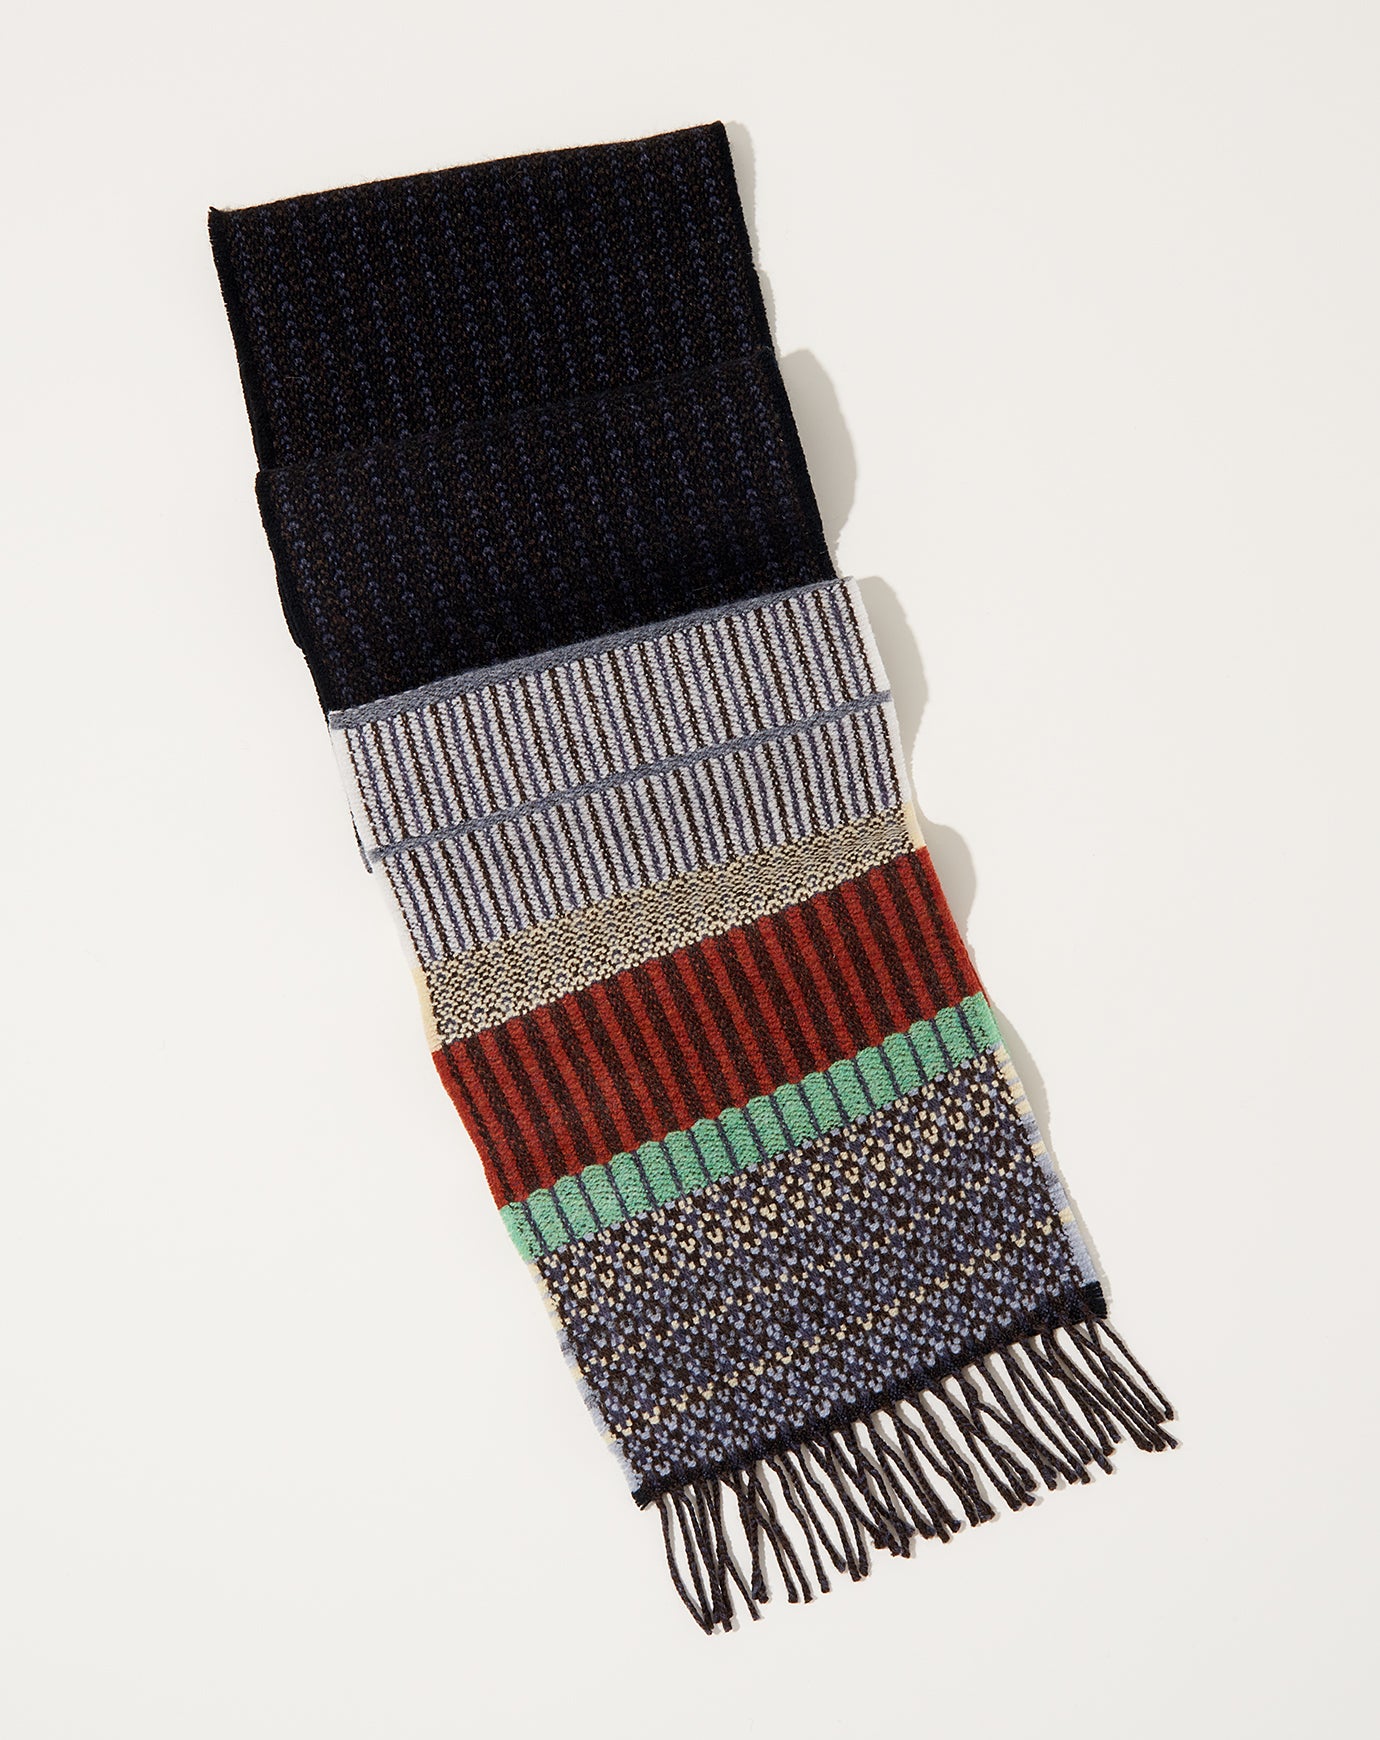 Wallace Sewell Anouilh Diffusion Scarf in Black